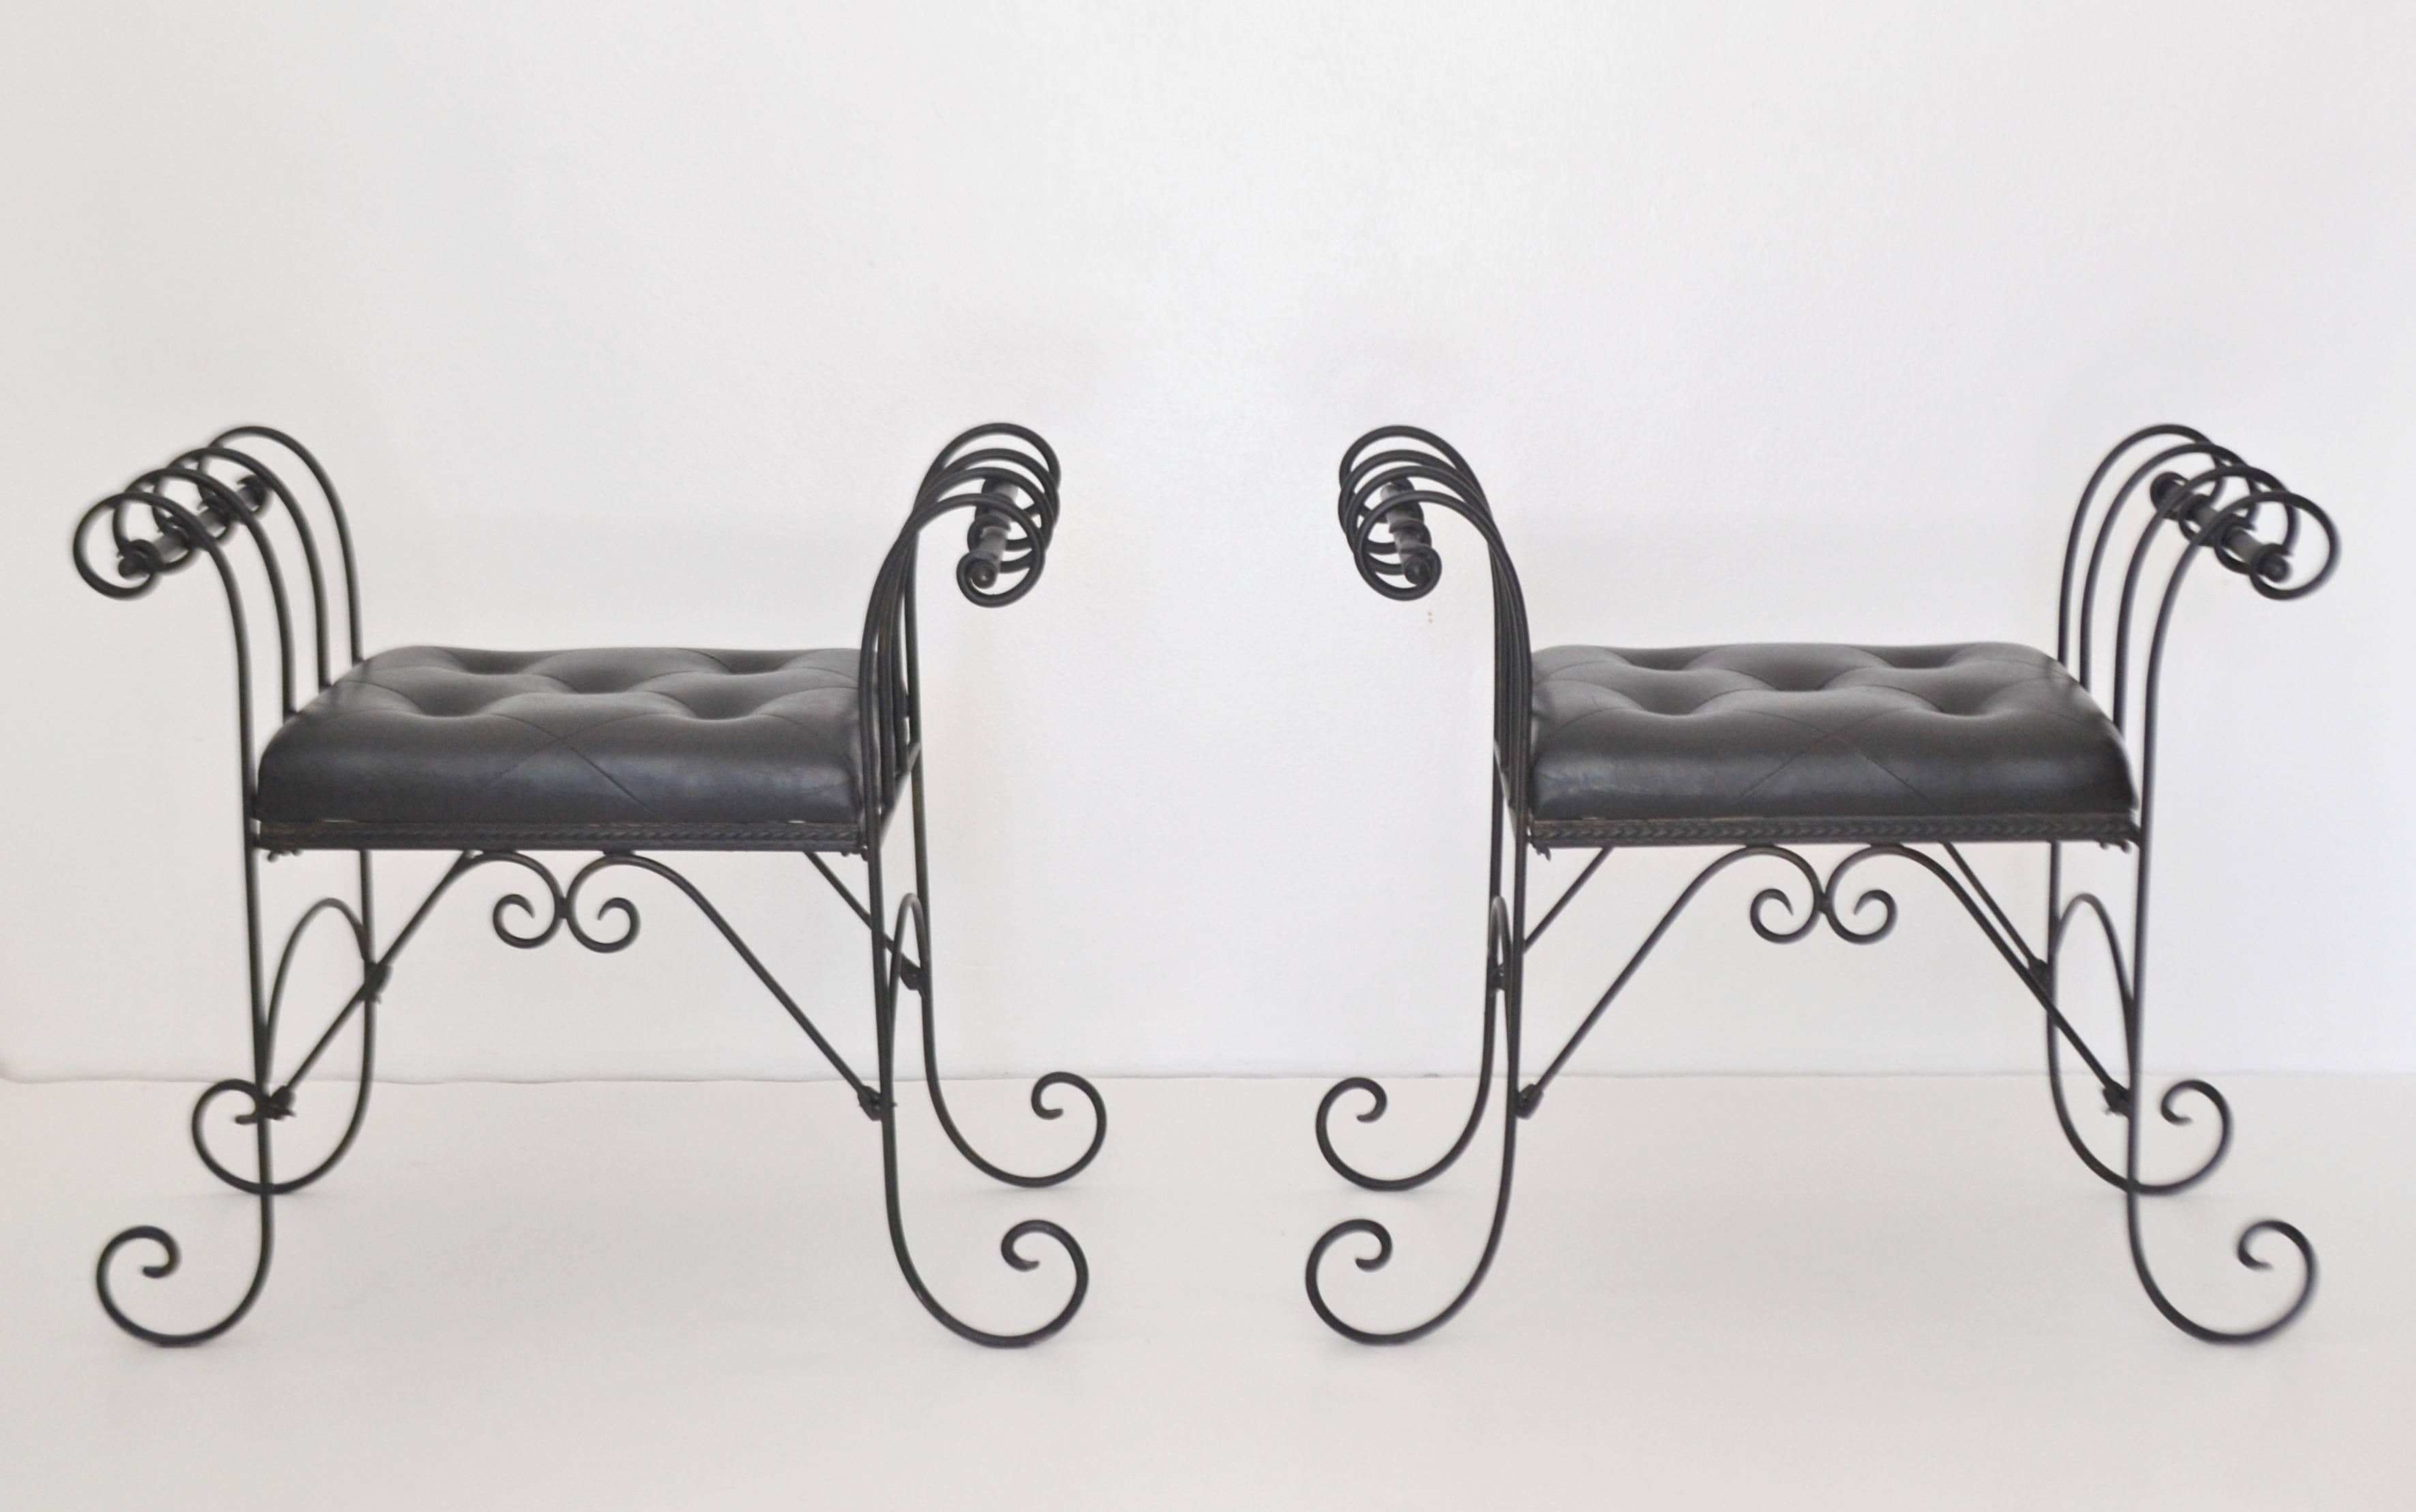 Pair of Midcentury Wrought Iron Tufted Leather Benches For Sale 2